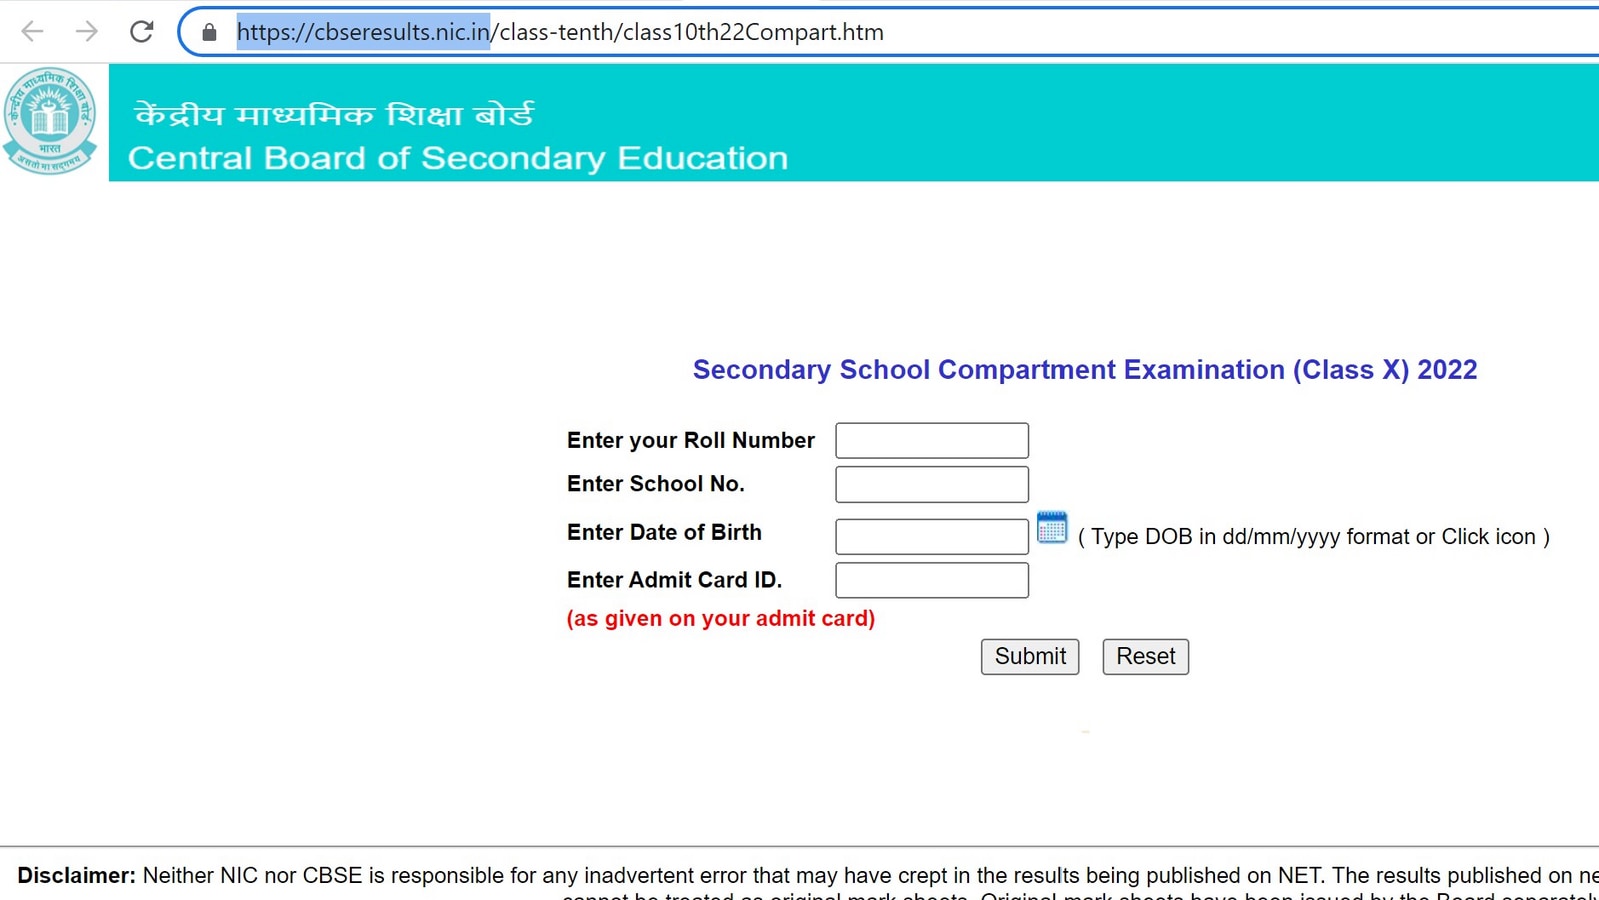 CBSE Class 10th compartment result out at cbse.gov.in: Know how to check